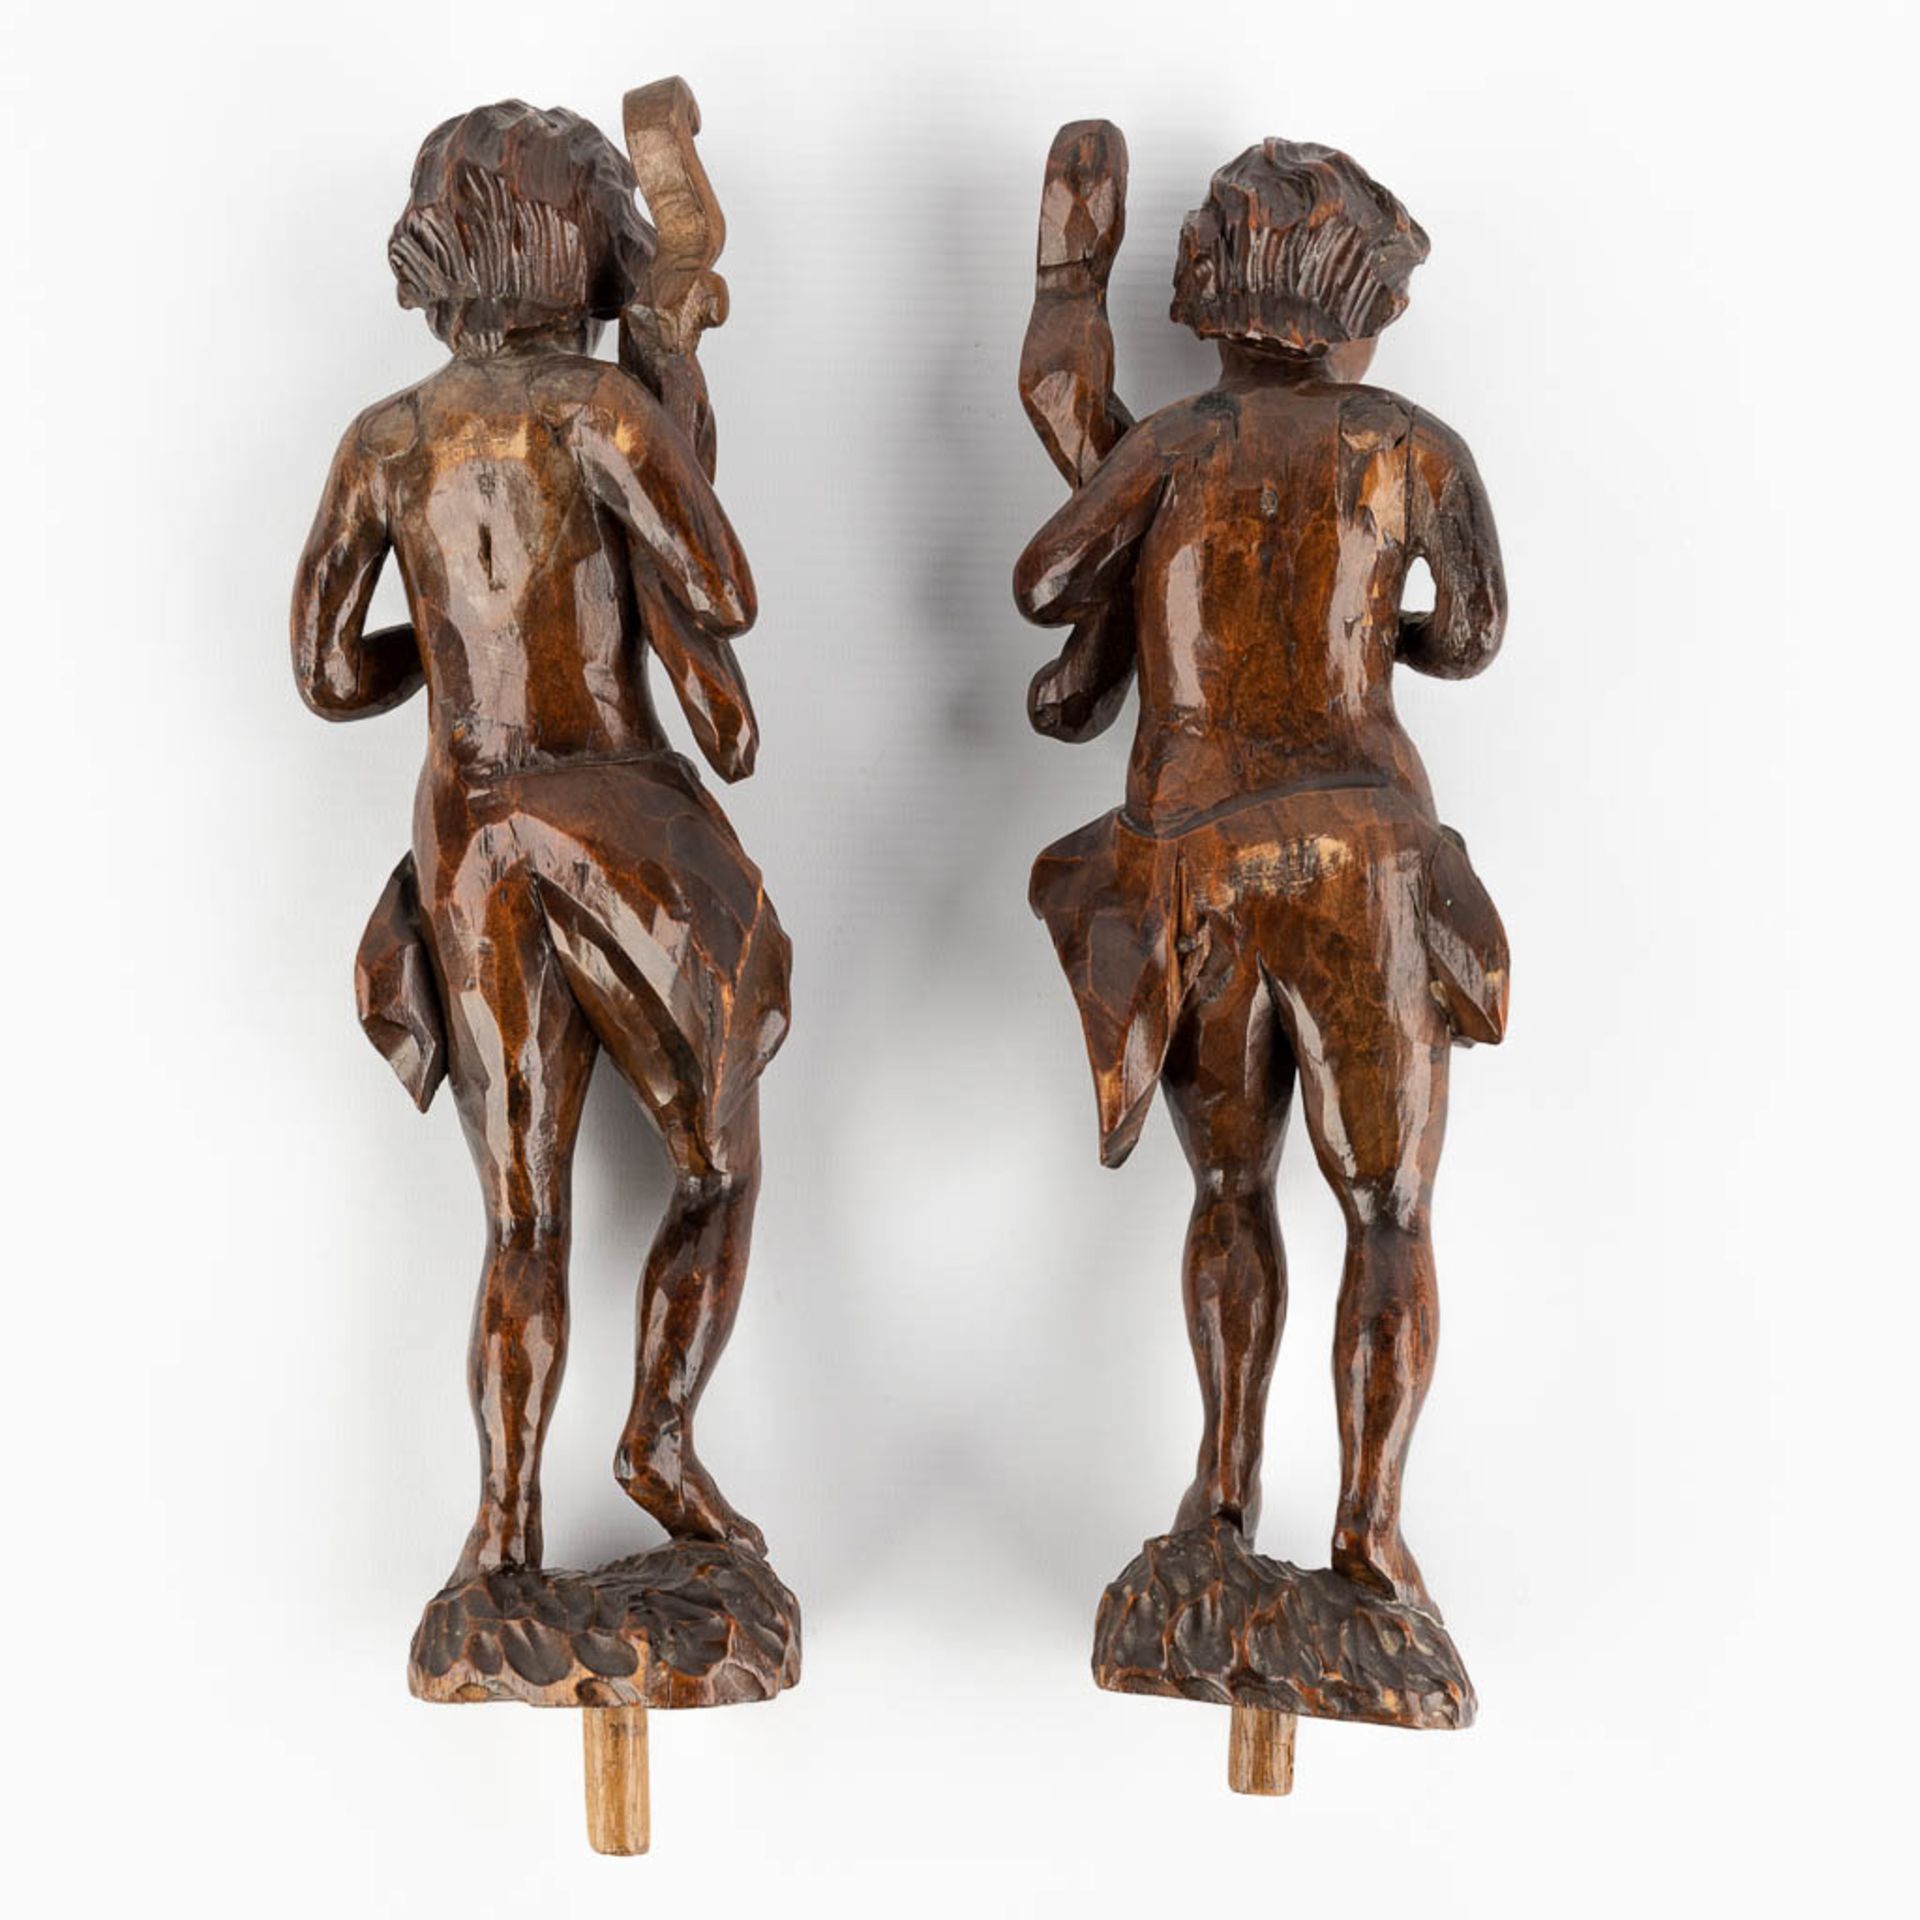 A pair of wood-sculptured figurines of young men, 18th C. (H:34 cm) - Image 7 of 10